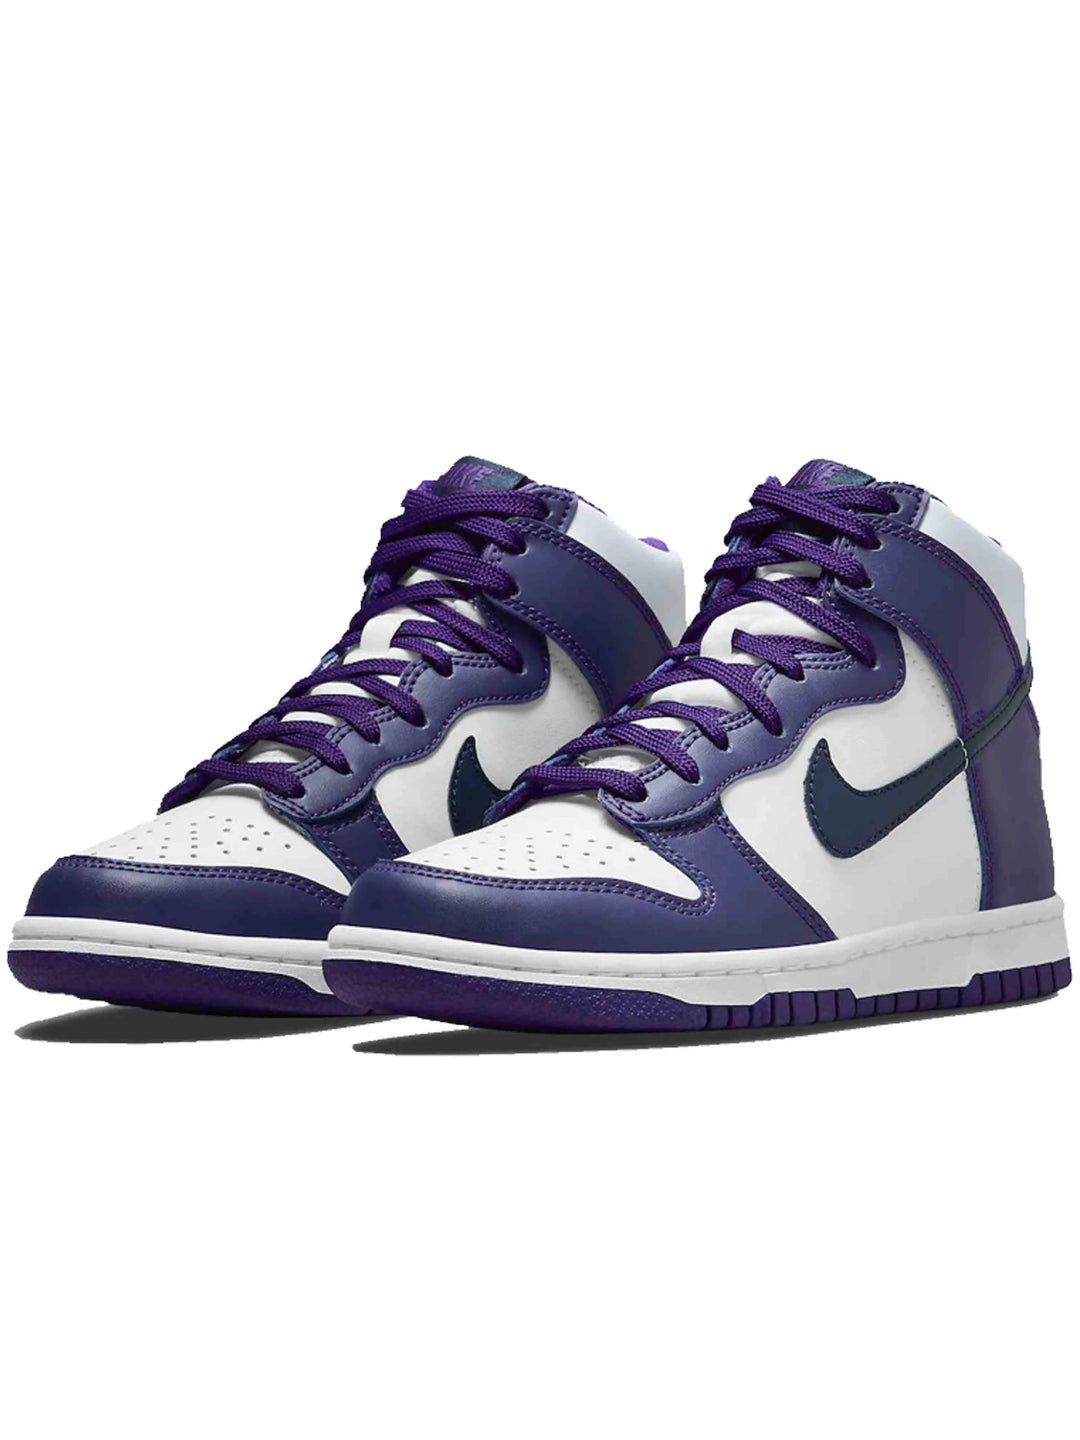 Nike Dunk High Electro Purple Midnight Navy (GS) Prior